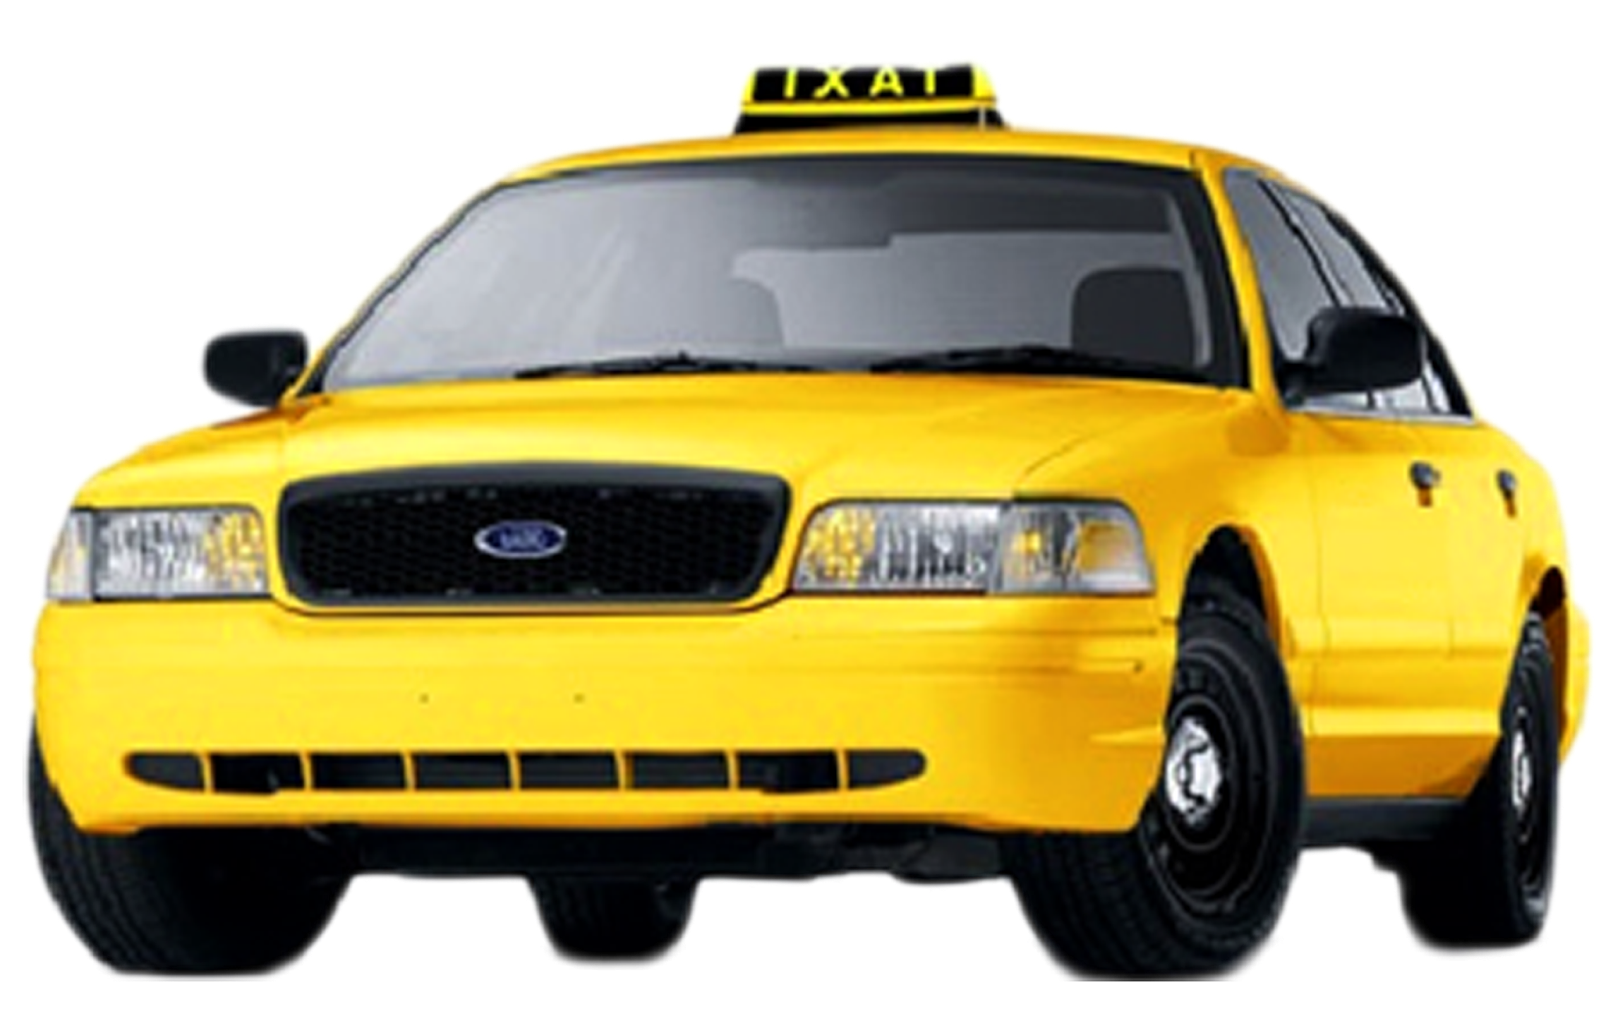 Taxi Cab High Quality Png Png Image - Taxi Cab, Transparent background PNG HD thumbnail